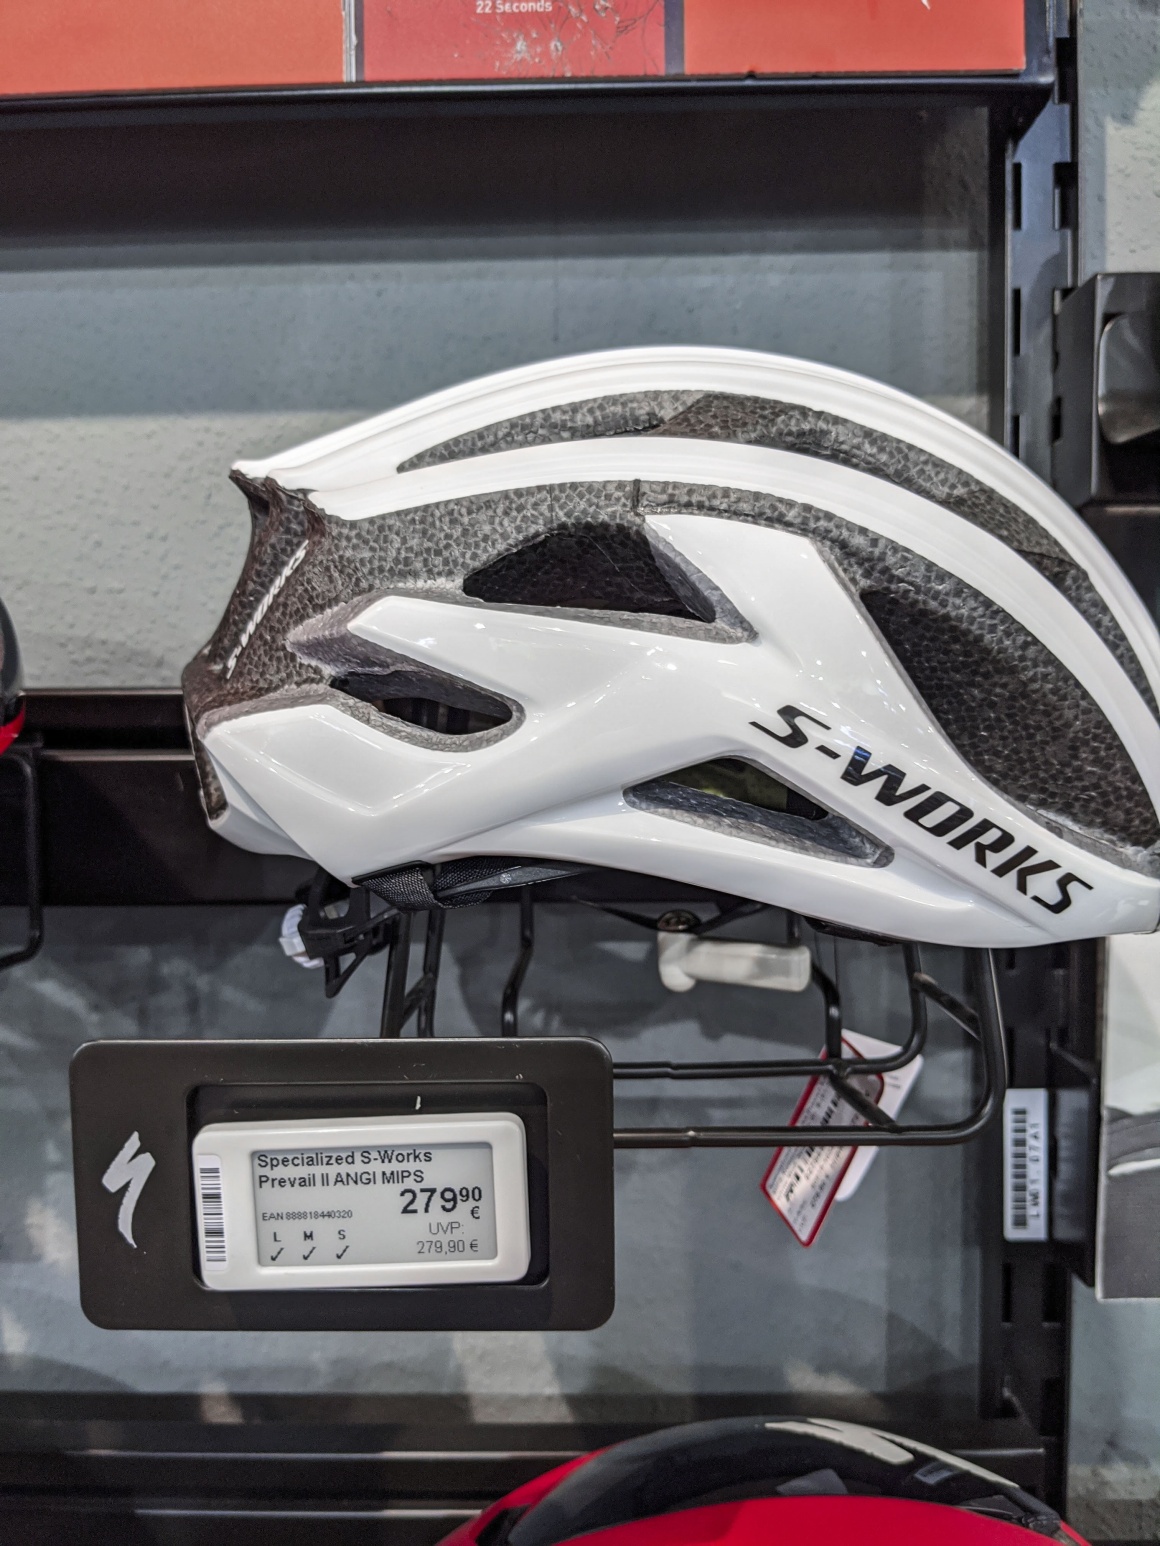 An electronic price tag on a bicycle helmet